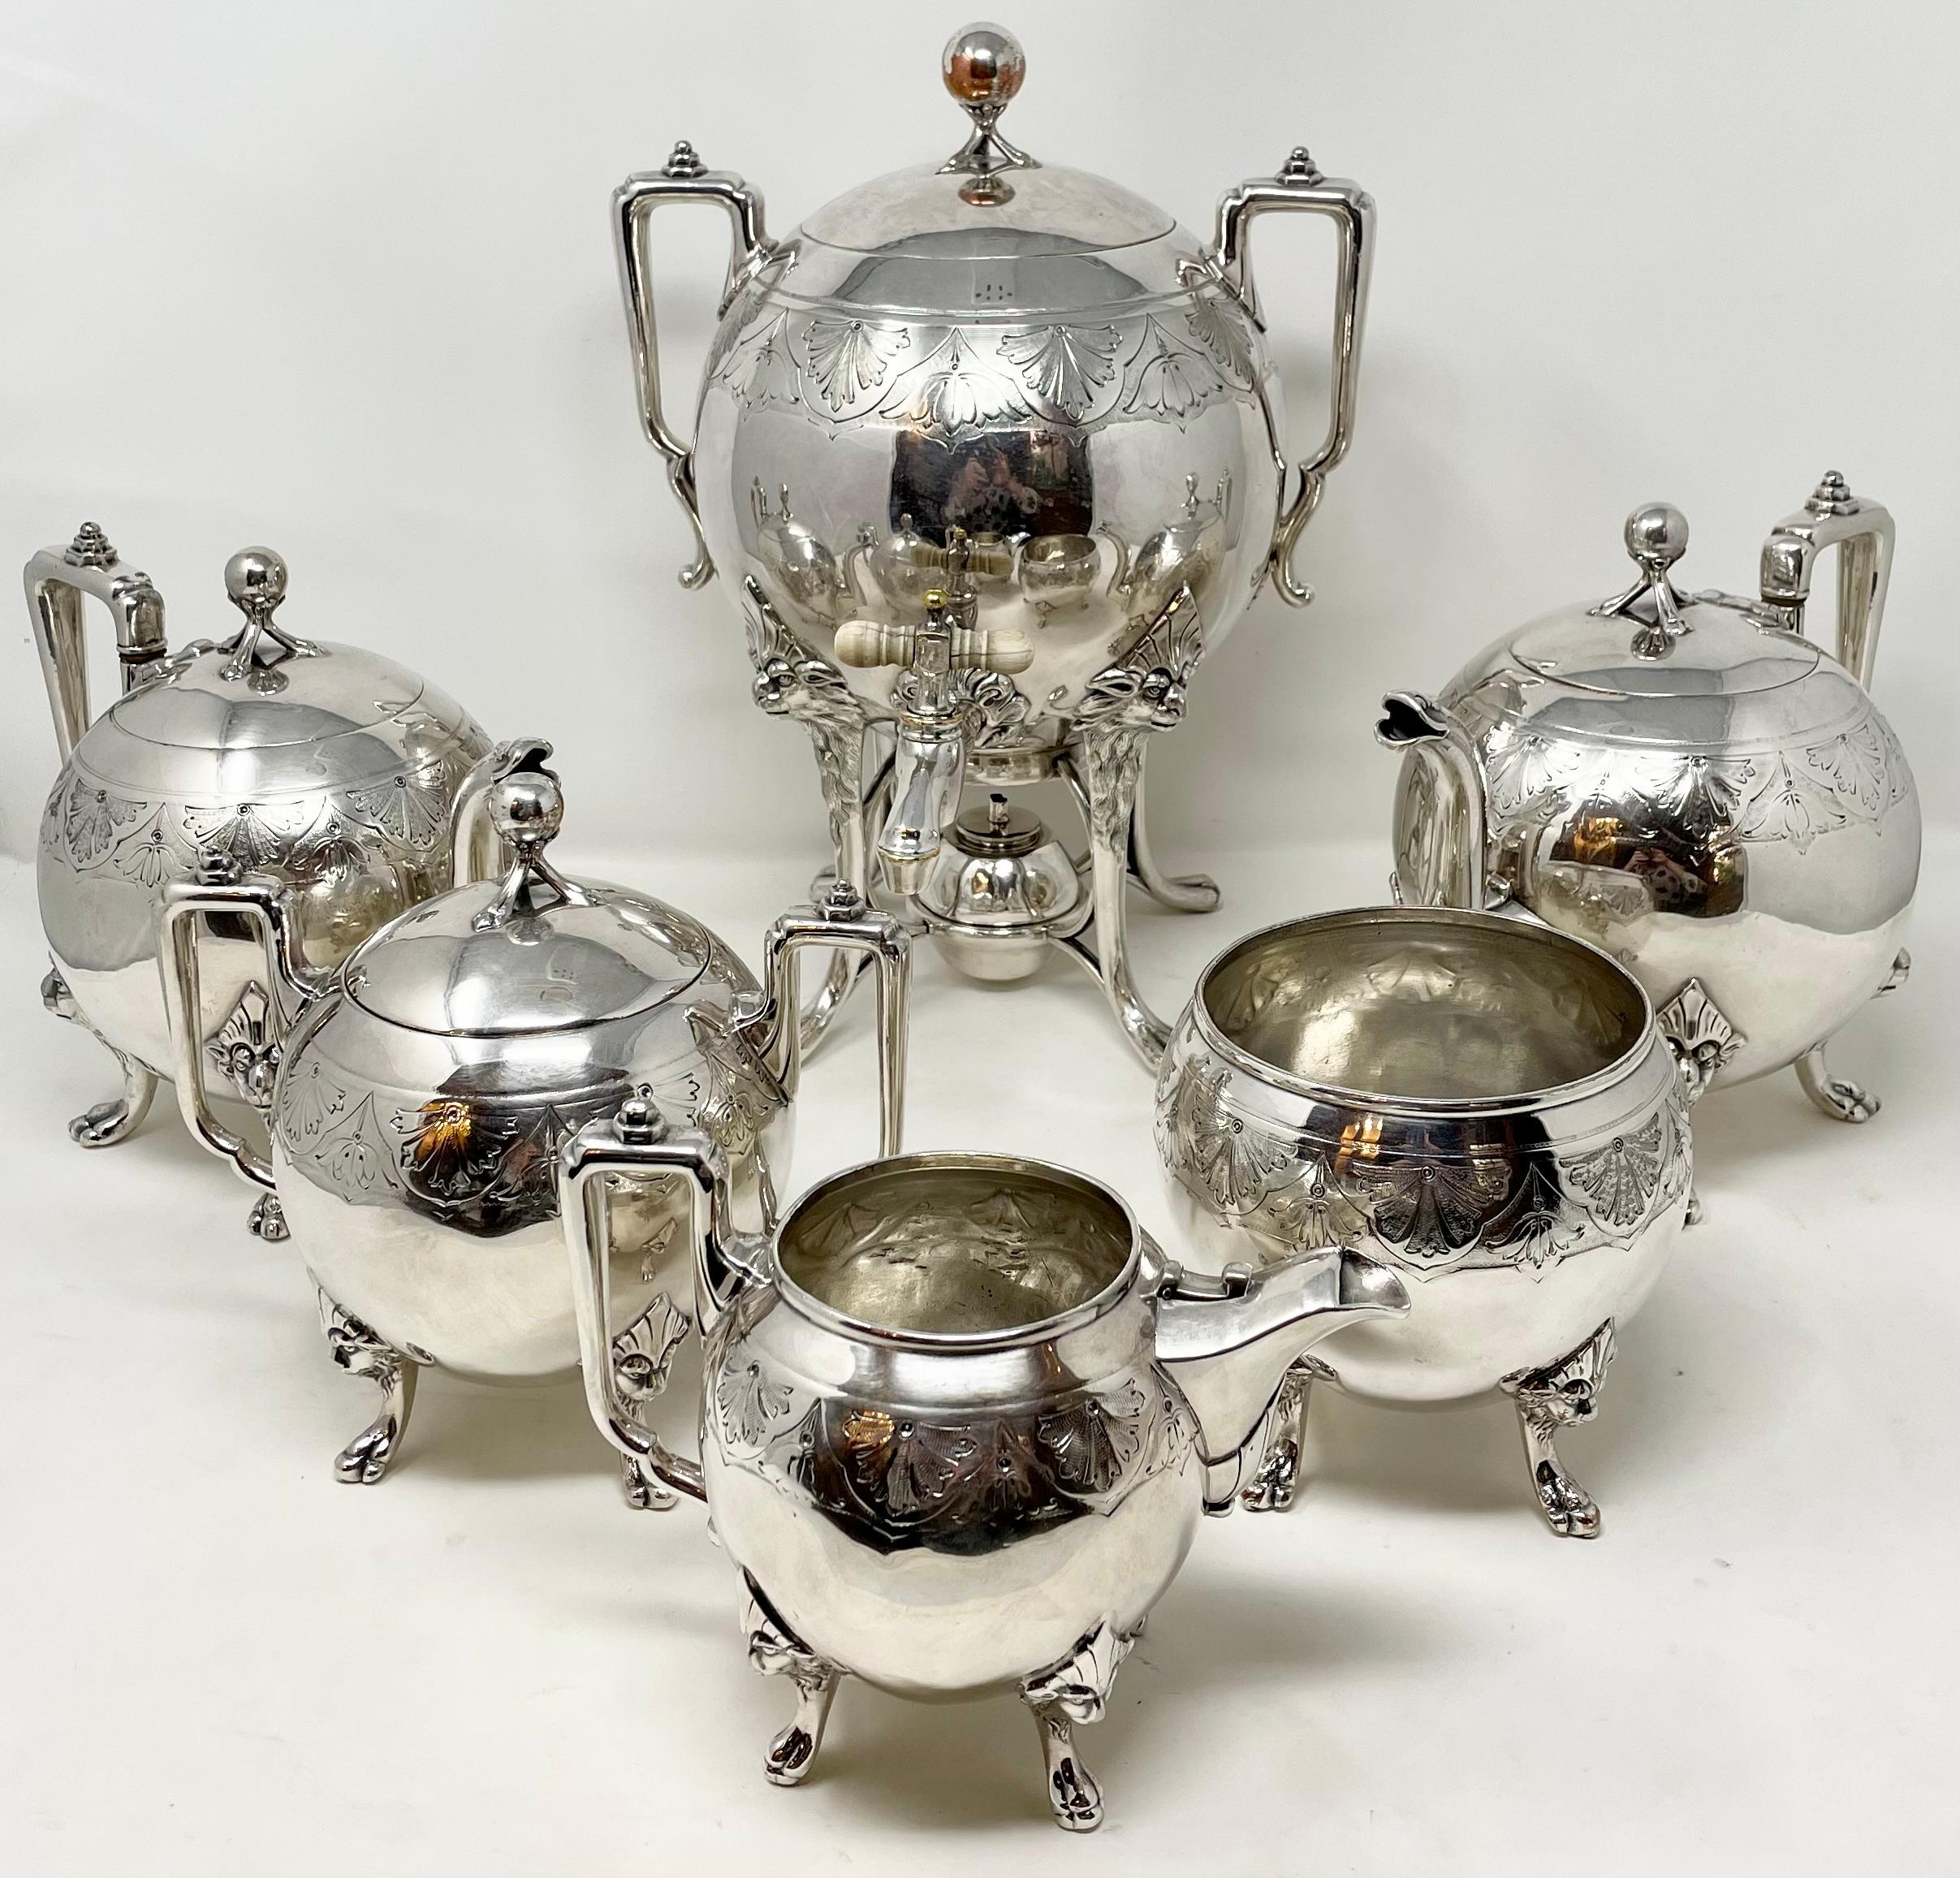 Antique American silver-plated 